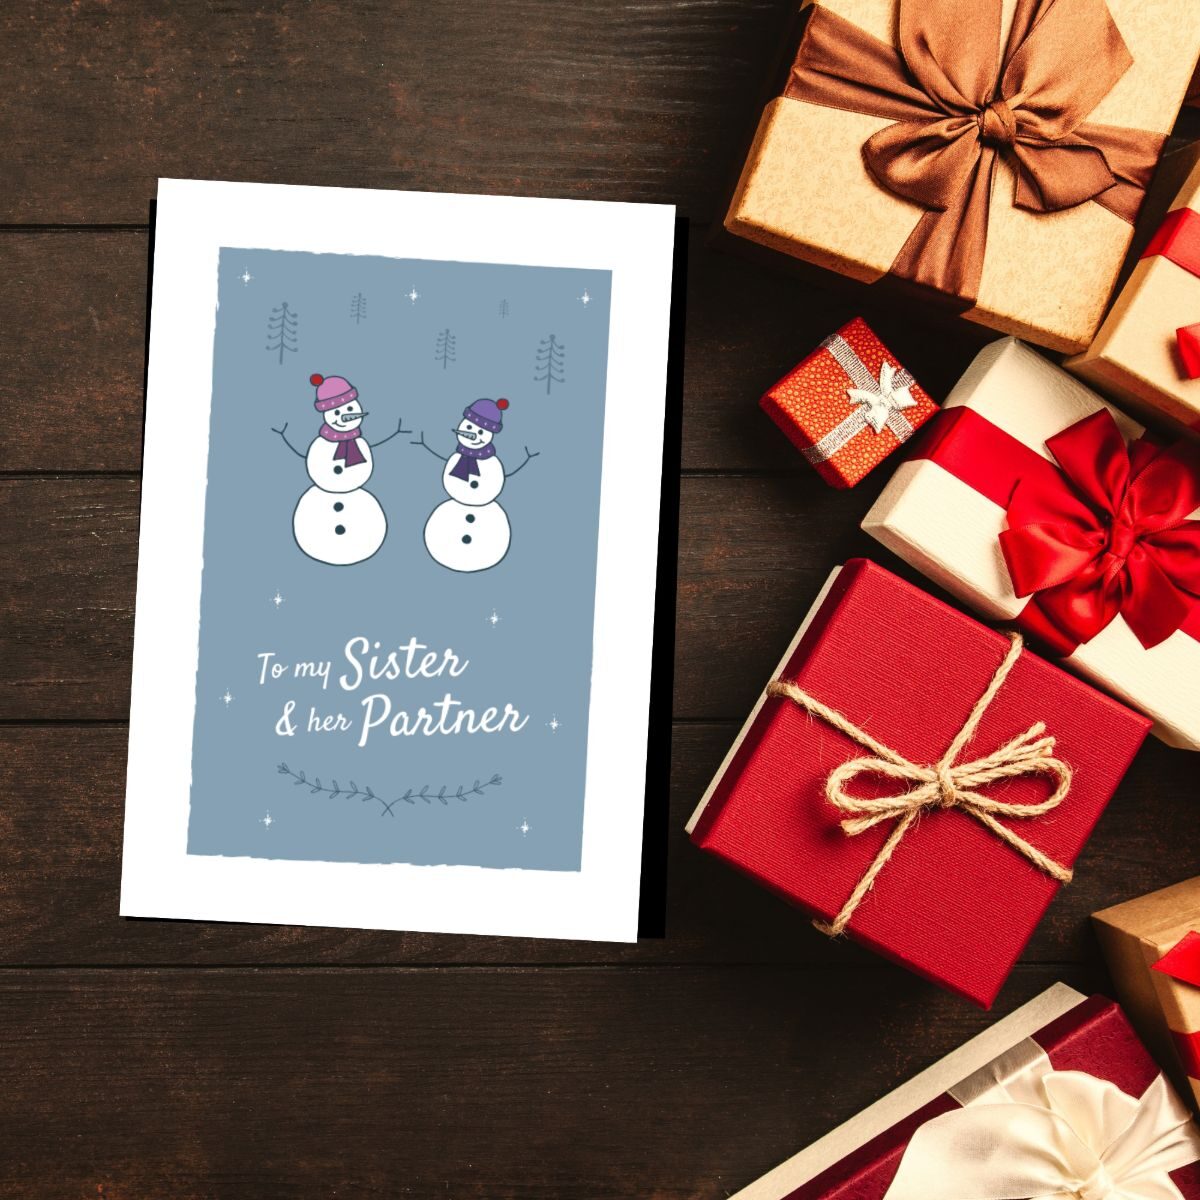 To my Sister and her Partner Snowmen Greetings Card